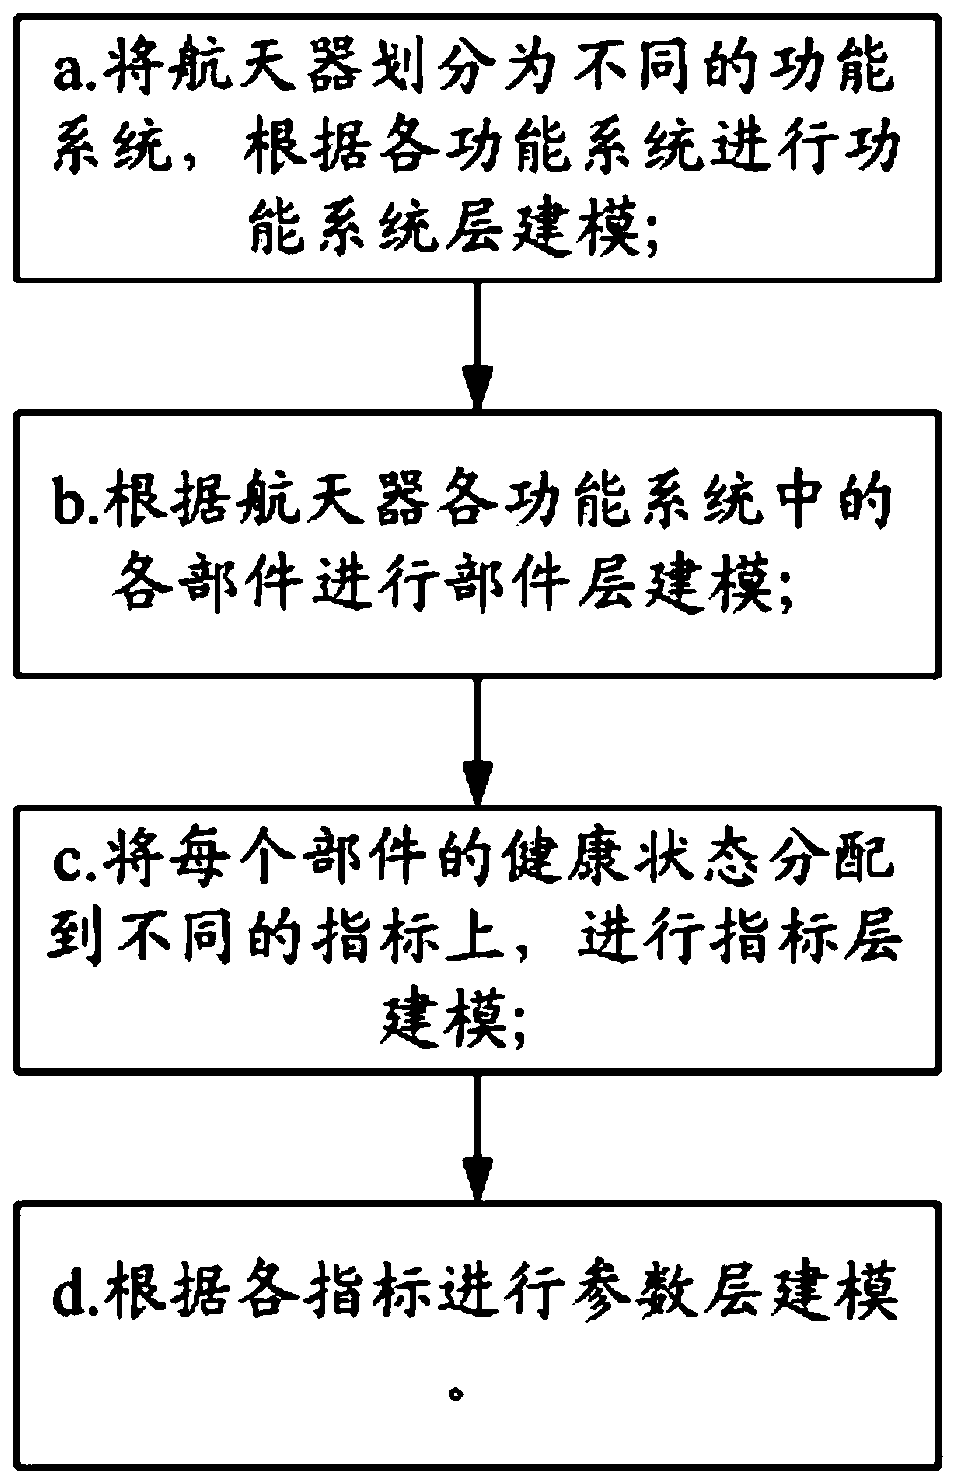 Spacecraft thermal control function system health assessment modeling method